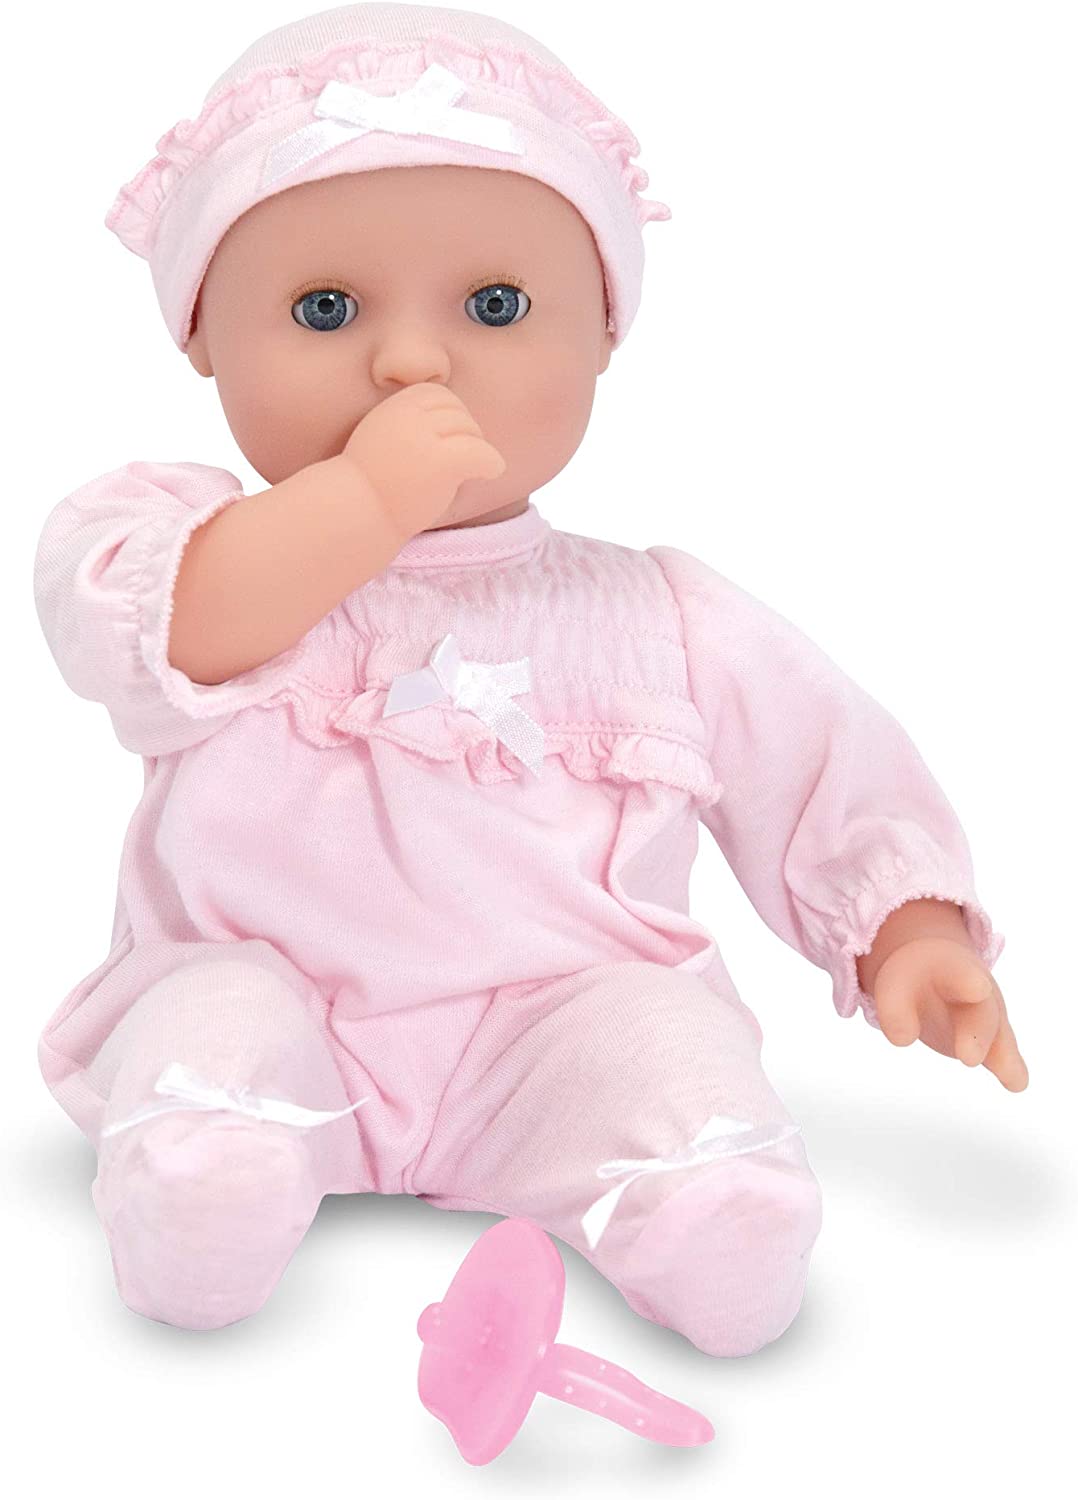 Melissa & Doug Ages 18M Plus 12 Inches Jenna Baby Doll